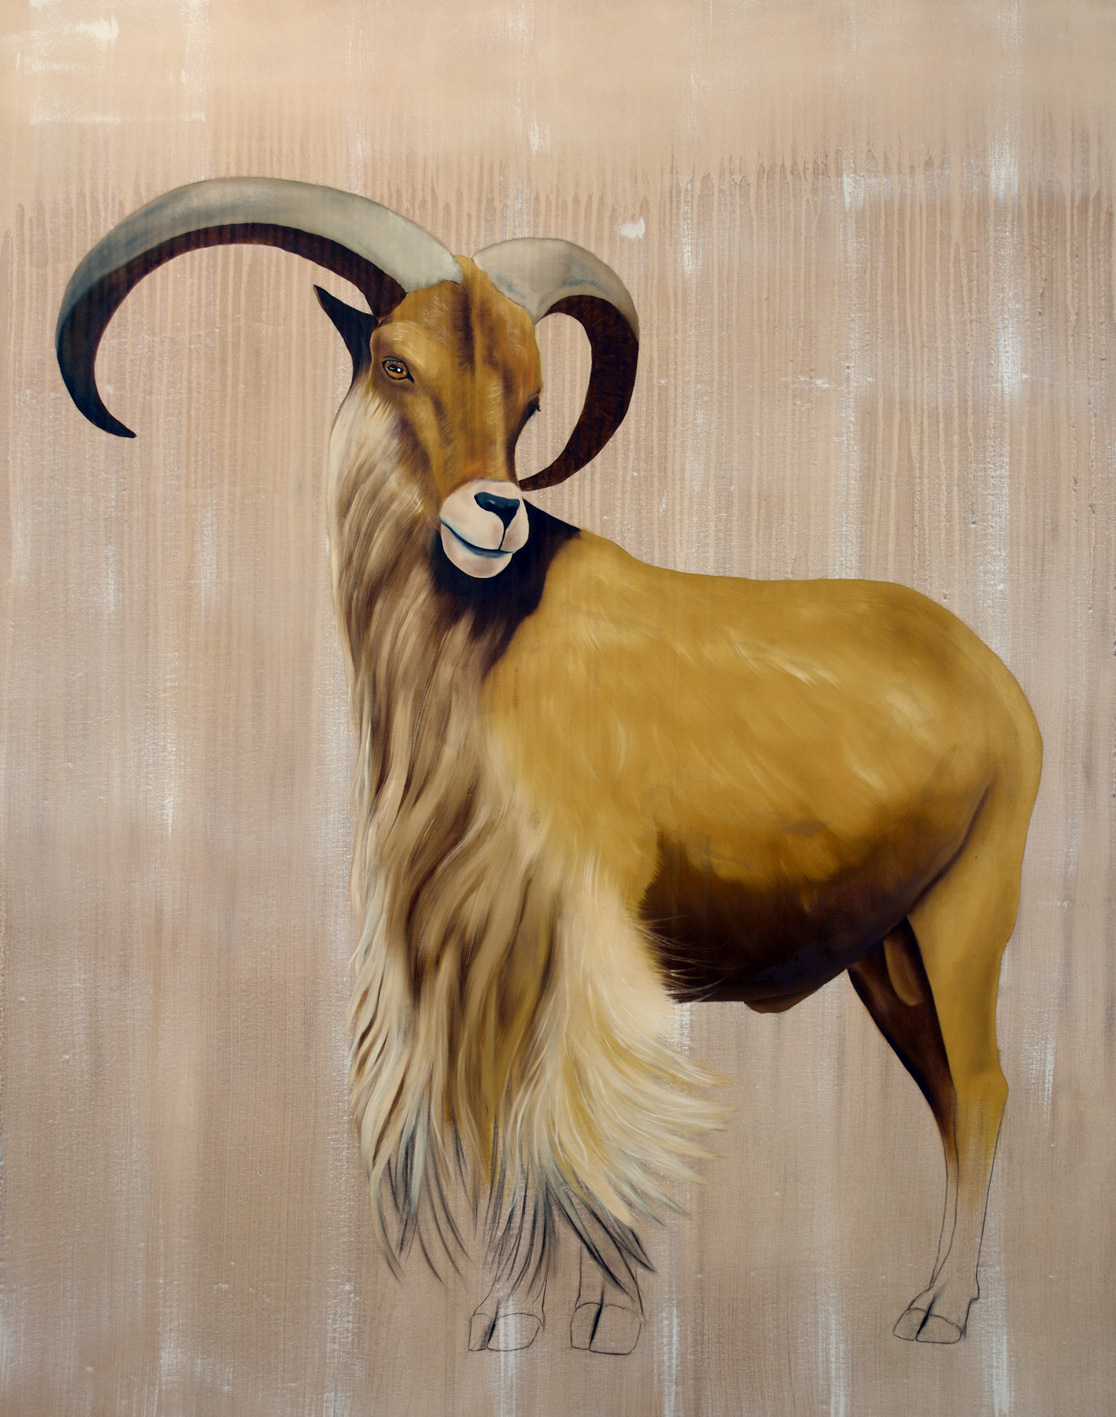 AMMOTRAGUS LERVIA barbary-sheep-goat-ammotragus-lervia Thierry Bisch Contemporary painter animals painting art  nature biodiversity conservation 